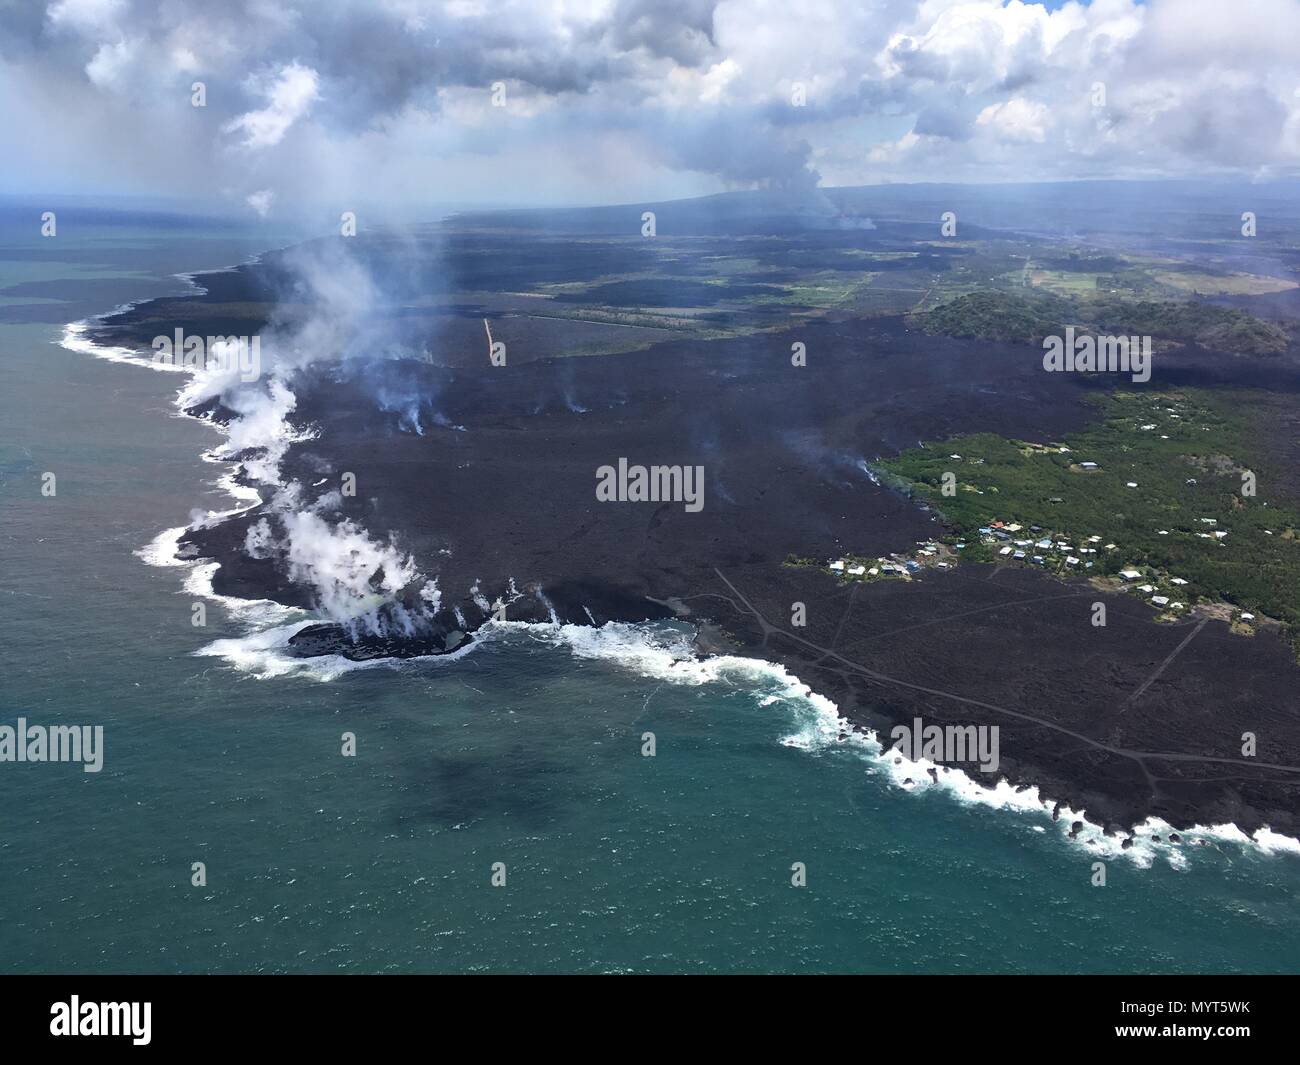 Hawaii, USA. 6th June, 2018. Lava flows into Kapoho Bay destroying forest and homes in the Vacationland area caused by the eruption of the Kilauea volcano June 6, 2018 in Hawaii. The recent eruption continues destroying homes, forcing evacuations and spewing lava and poison gas on the Big Island of Hawaii. Credit: Planetpix/Alamy Live News Stock Photo